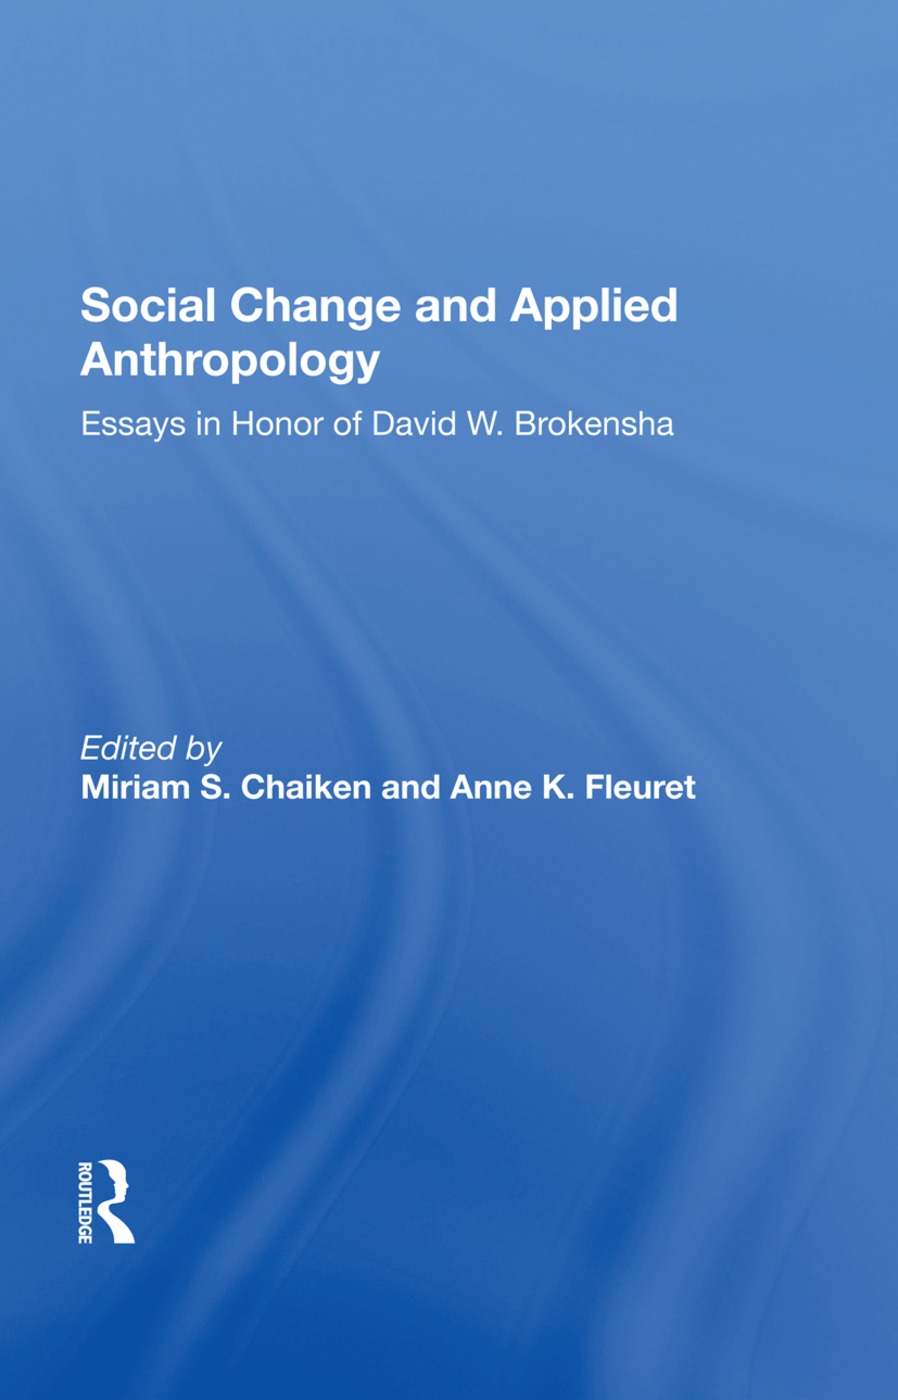 Social Change and Applied Anthropology: Essays in Honor of David W. Brokensha